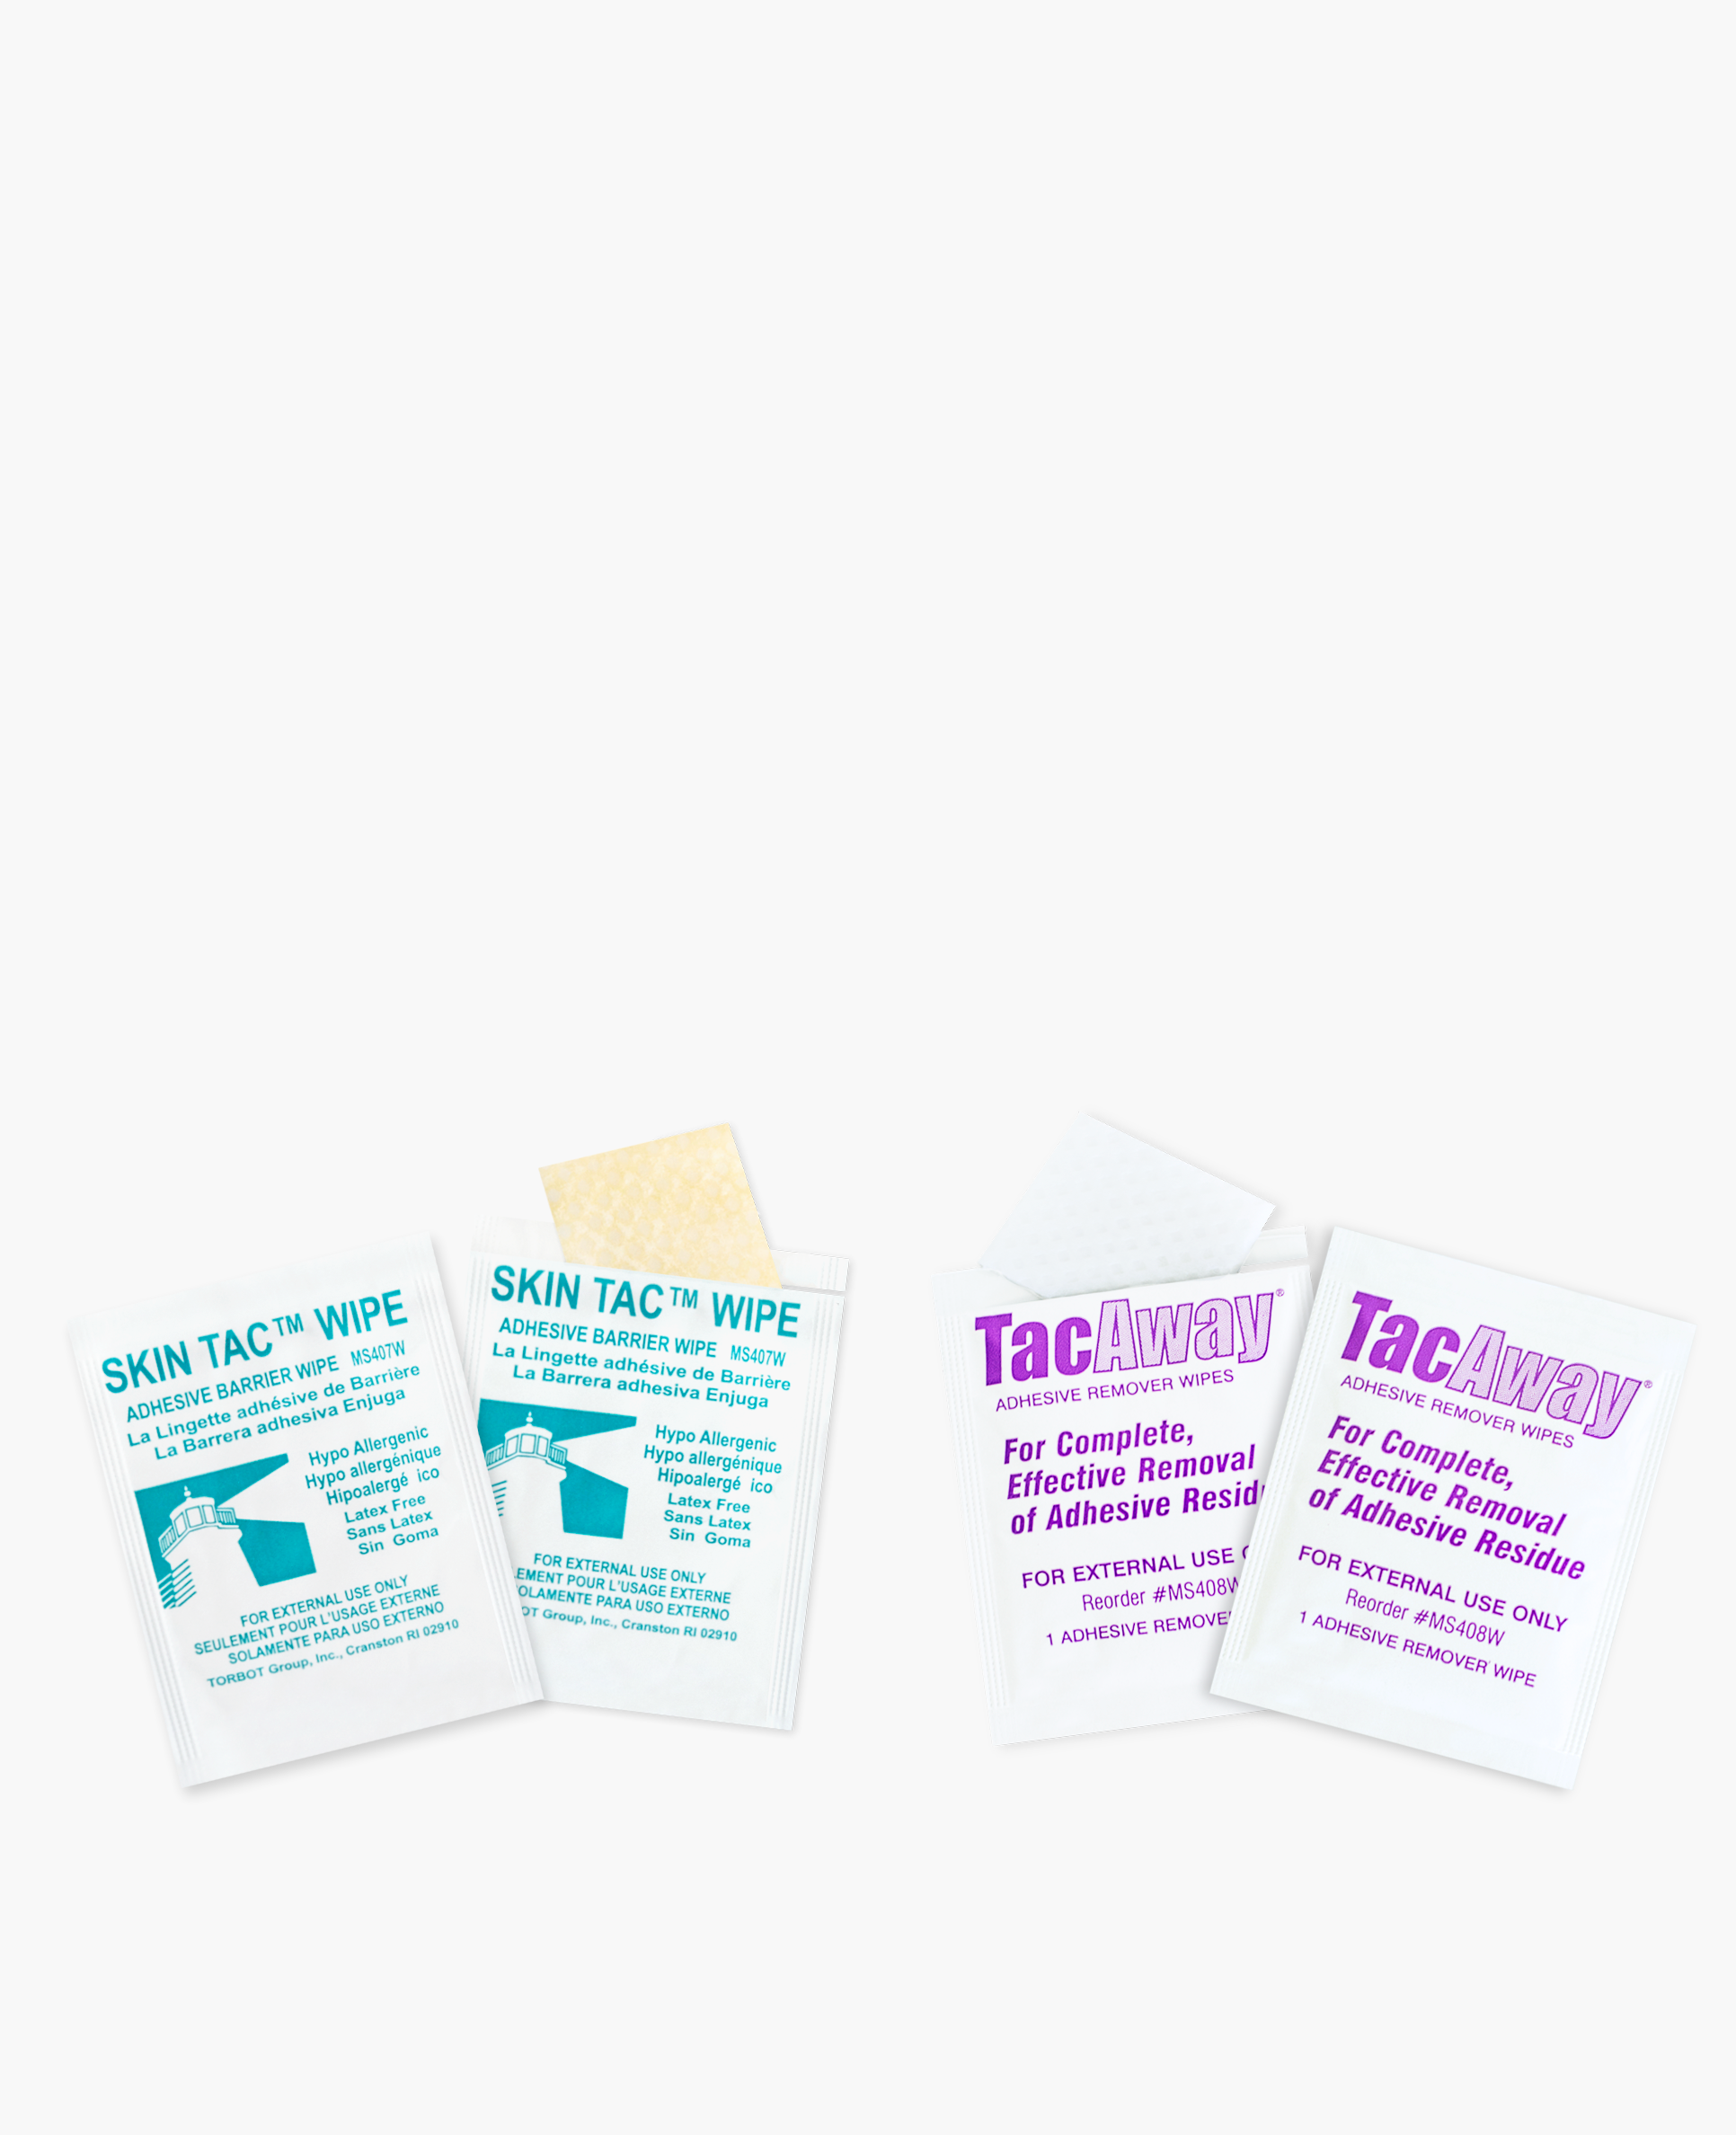 Tac Away Adhesive Remover Wipes by Torbot